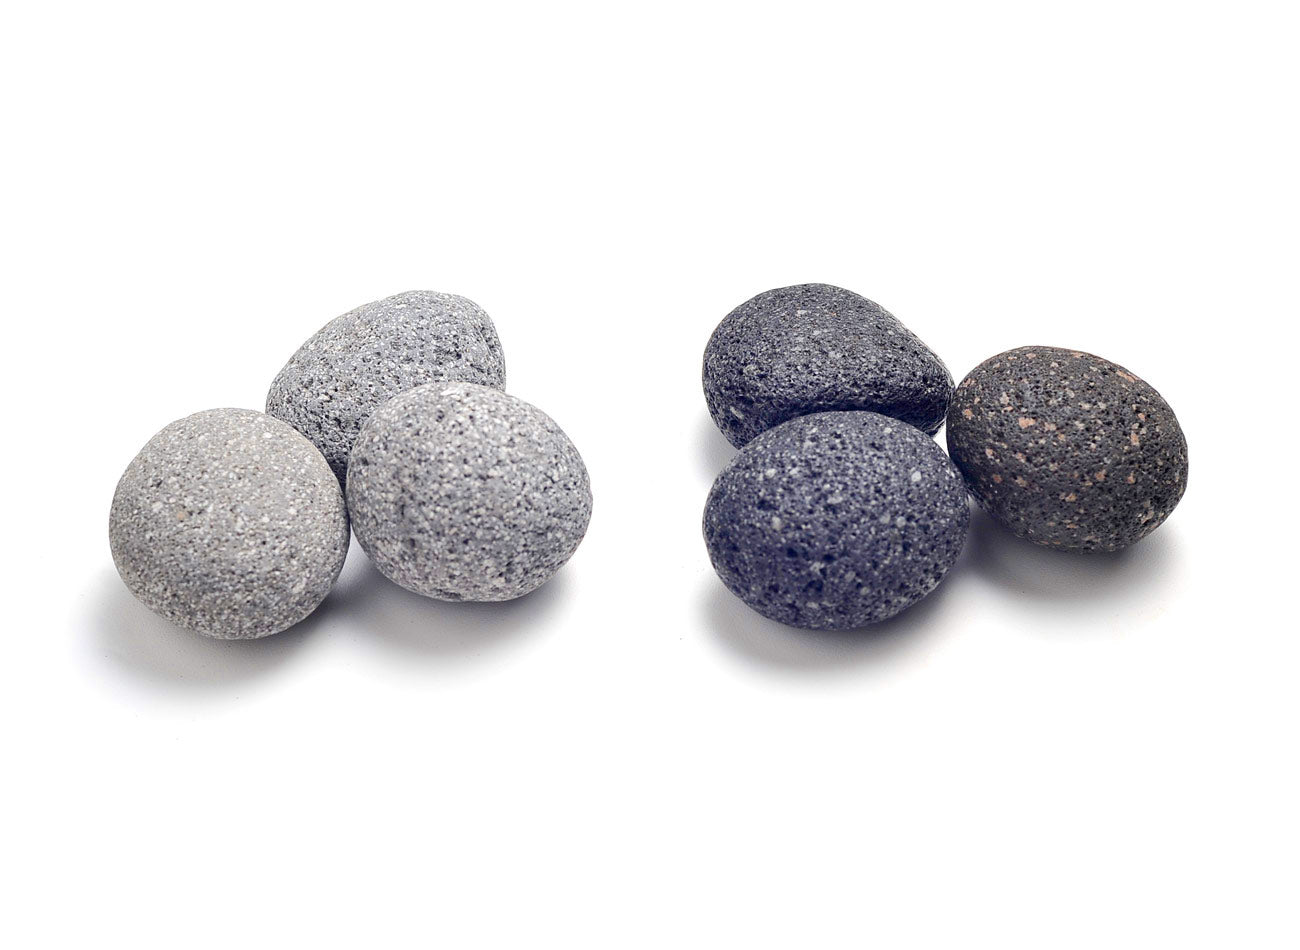 Black Lava Tumbled Round  10 to 20 mm 1 KG Bag - Infuse with our oils - NEW1021